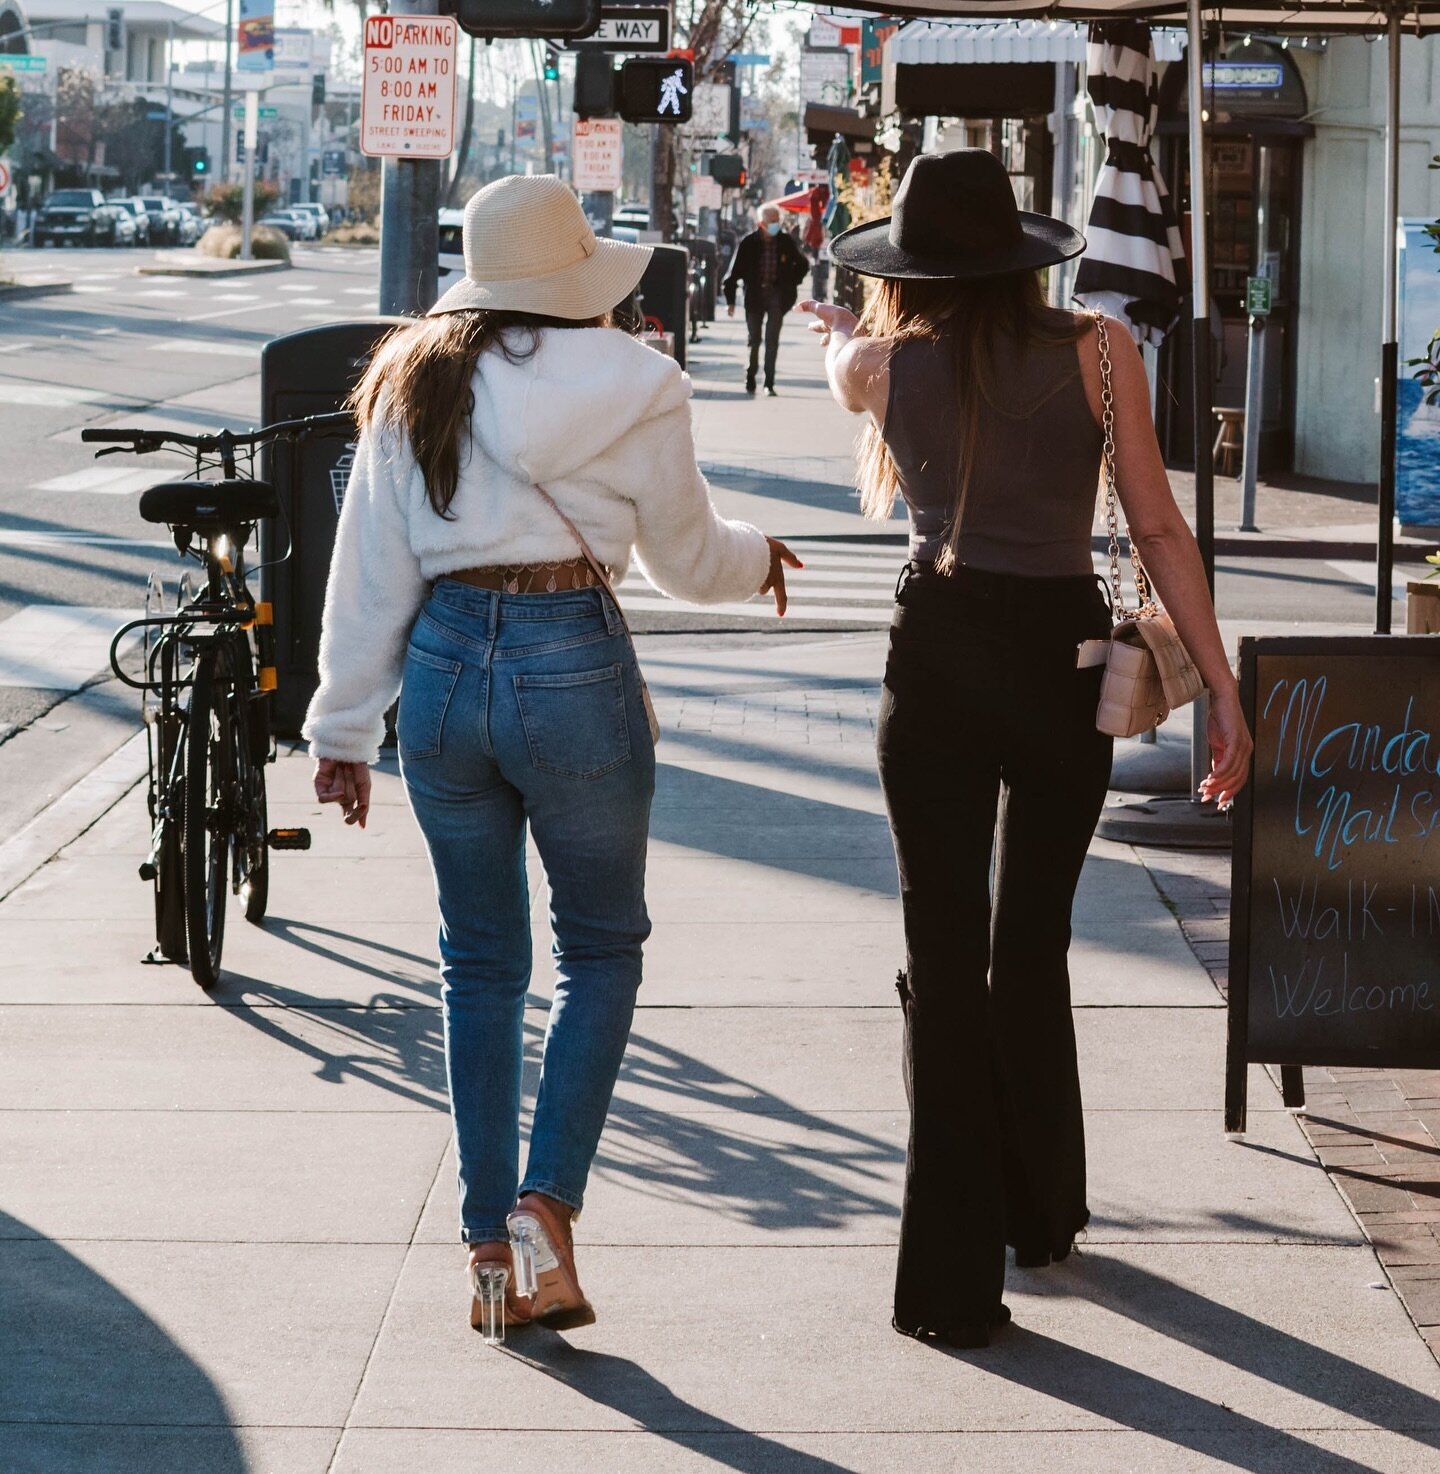 Meet up on 2nd Street to find everything you need, from cozy cafes and trendy boutiques to elevated dining and much more! 

Keep up with all things Belmont Shore right here on @belmontshorelb 💙

.
.
.
#belmontshore #letsmeeton2ndst #longbeach #lbc #